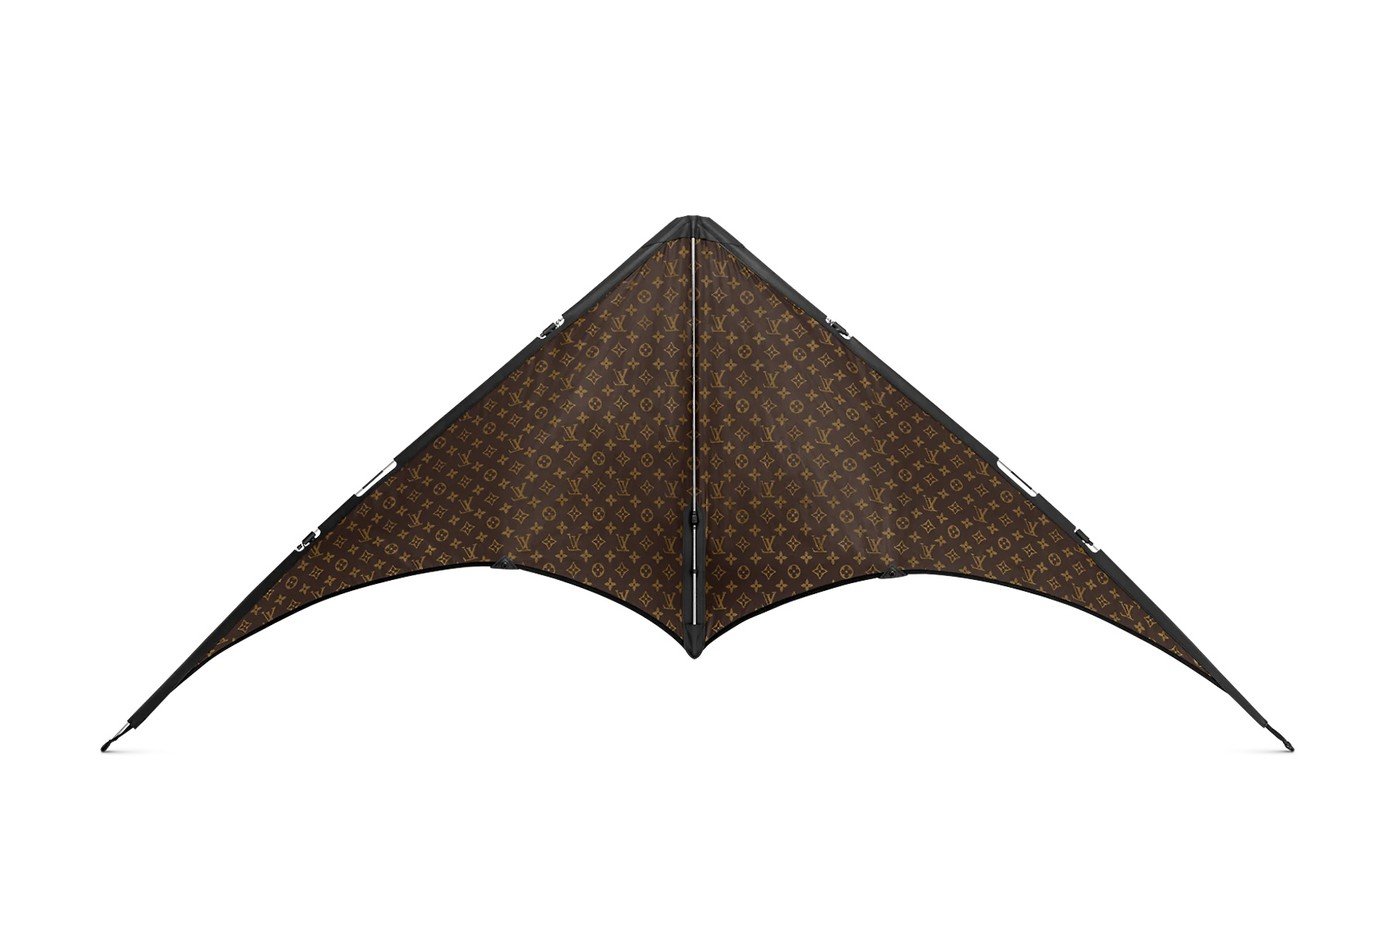 Louis Vuitton announces new additions in Taurillon Monogram and